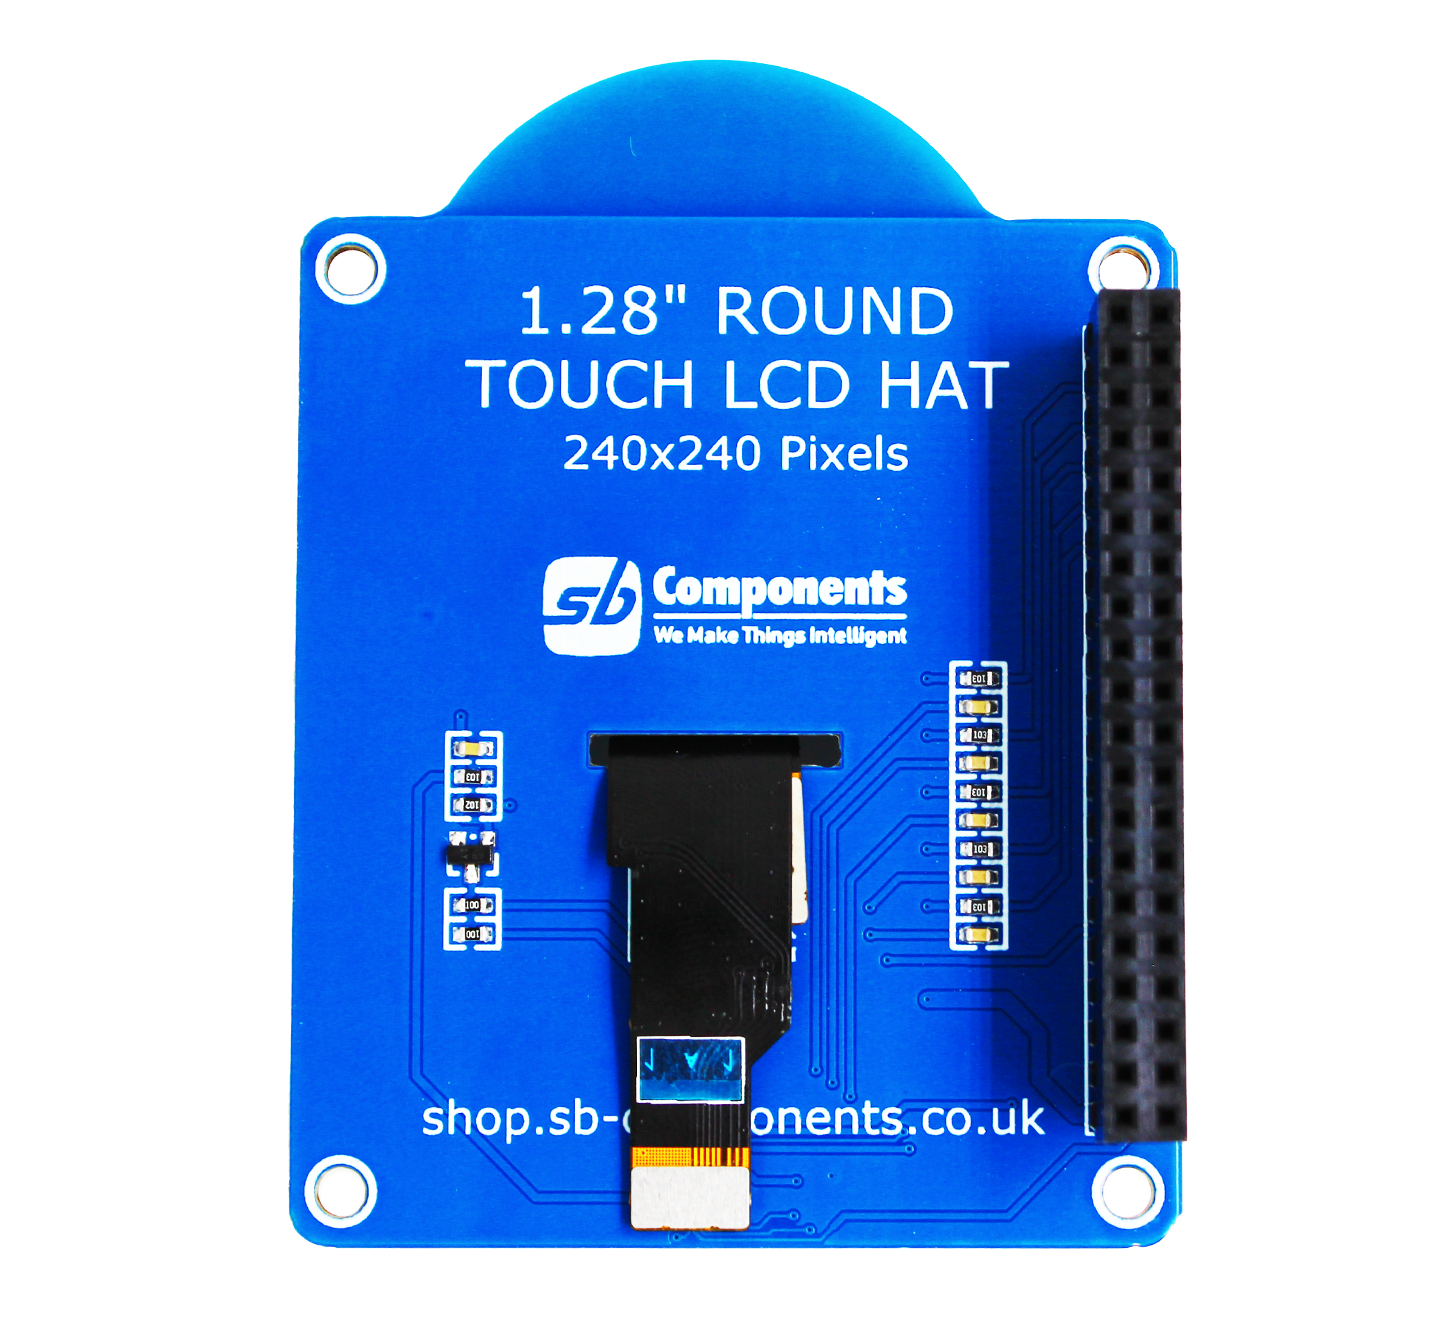 1.28 Round Touch LCD HAT